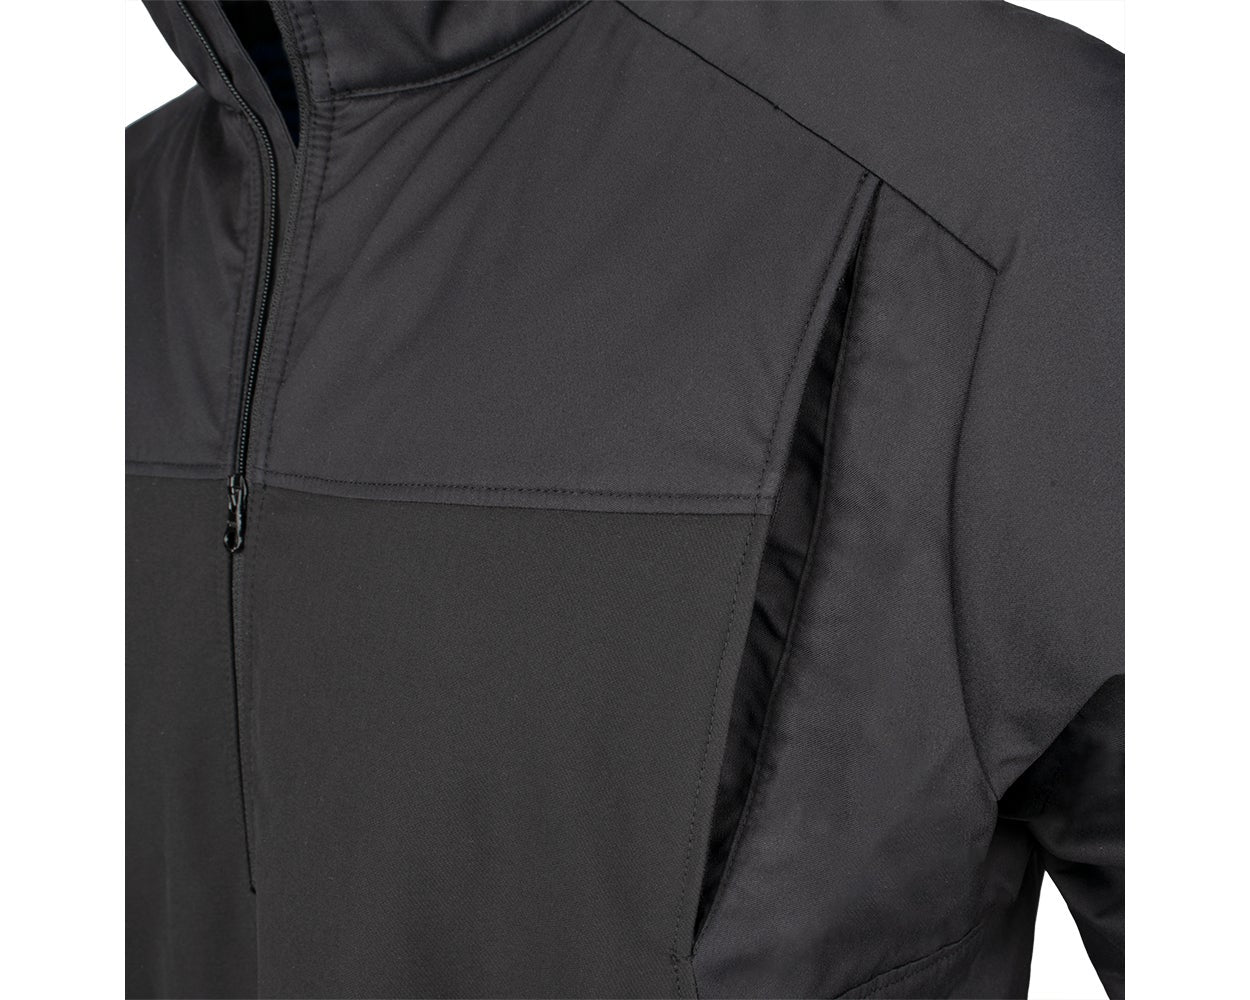 Flying Cross DutyGuard HT (Hybrid Technology) Pullover 57100 - Newest Products